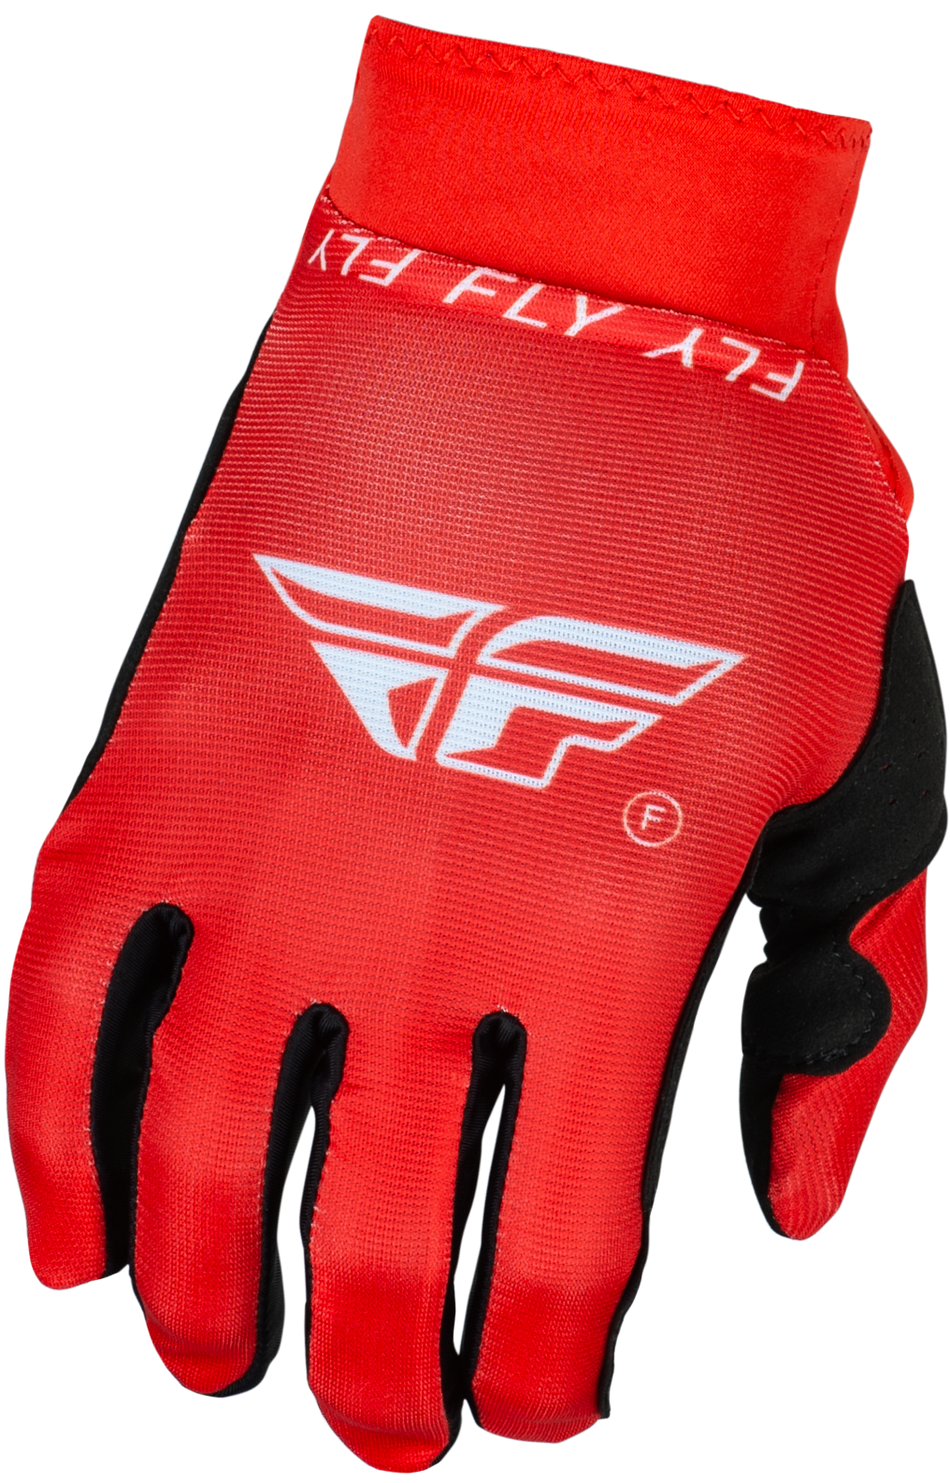 FLY RACING Pro Lite Gloves Red/White Lg 377-044L